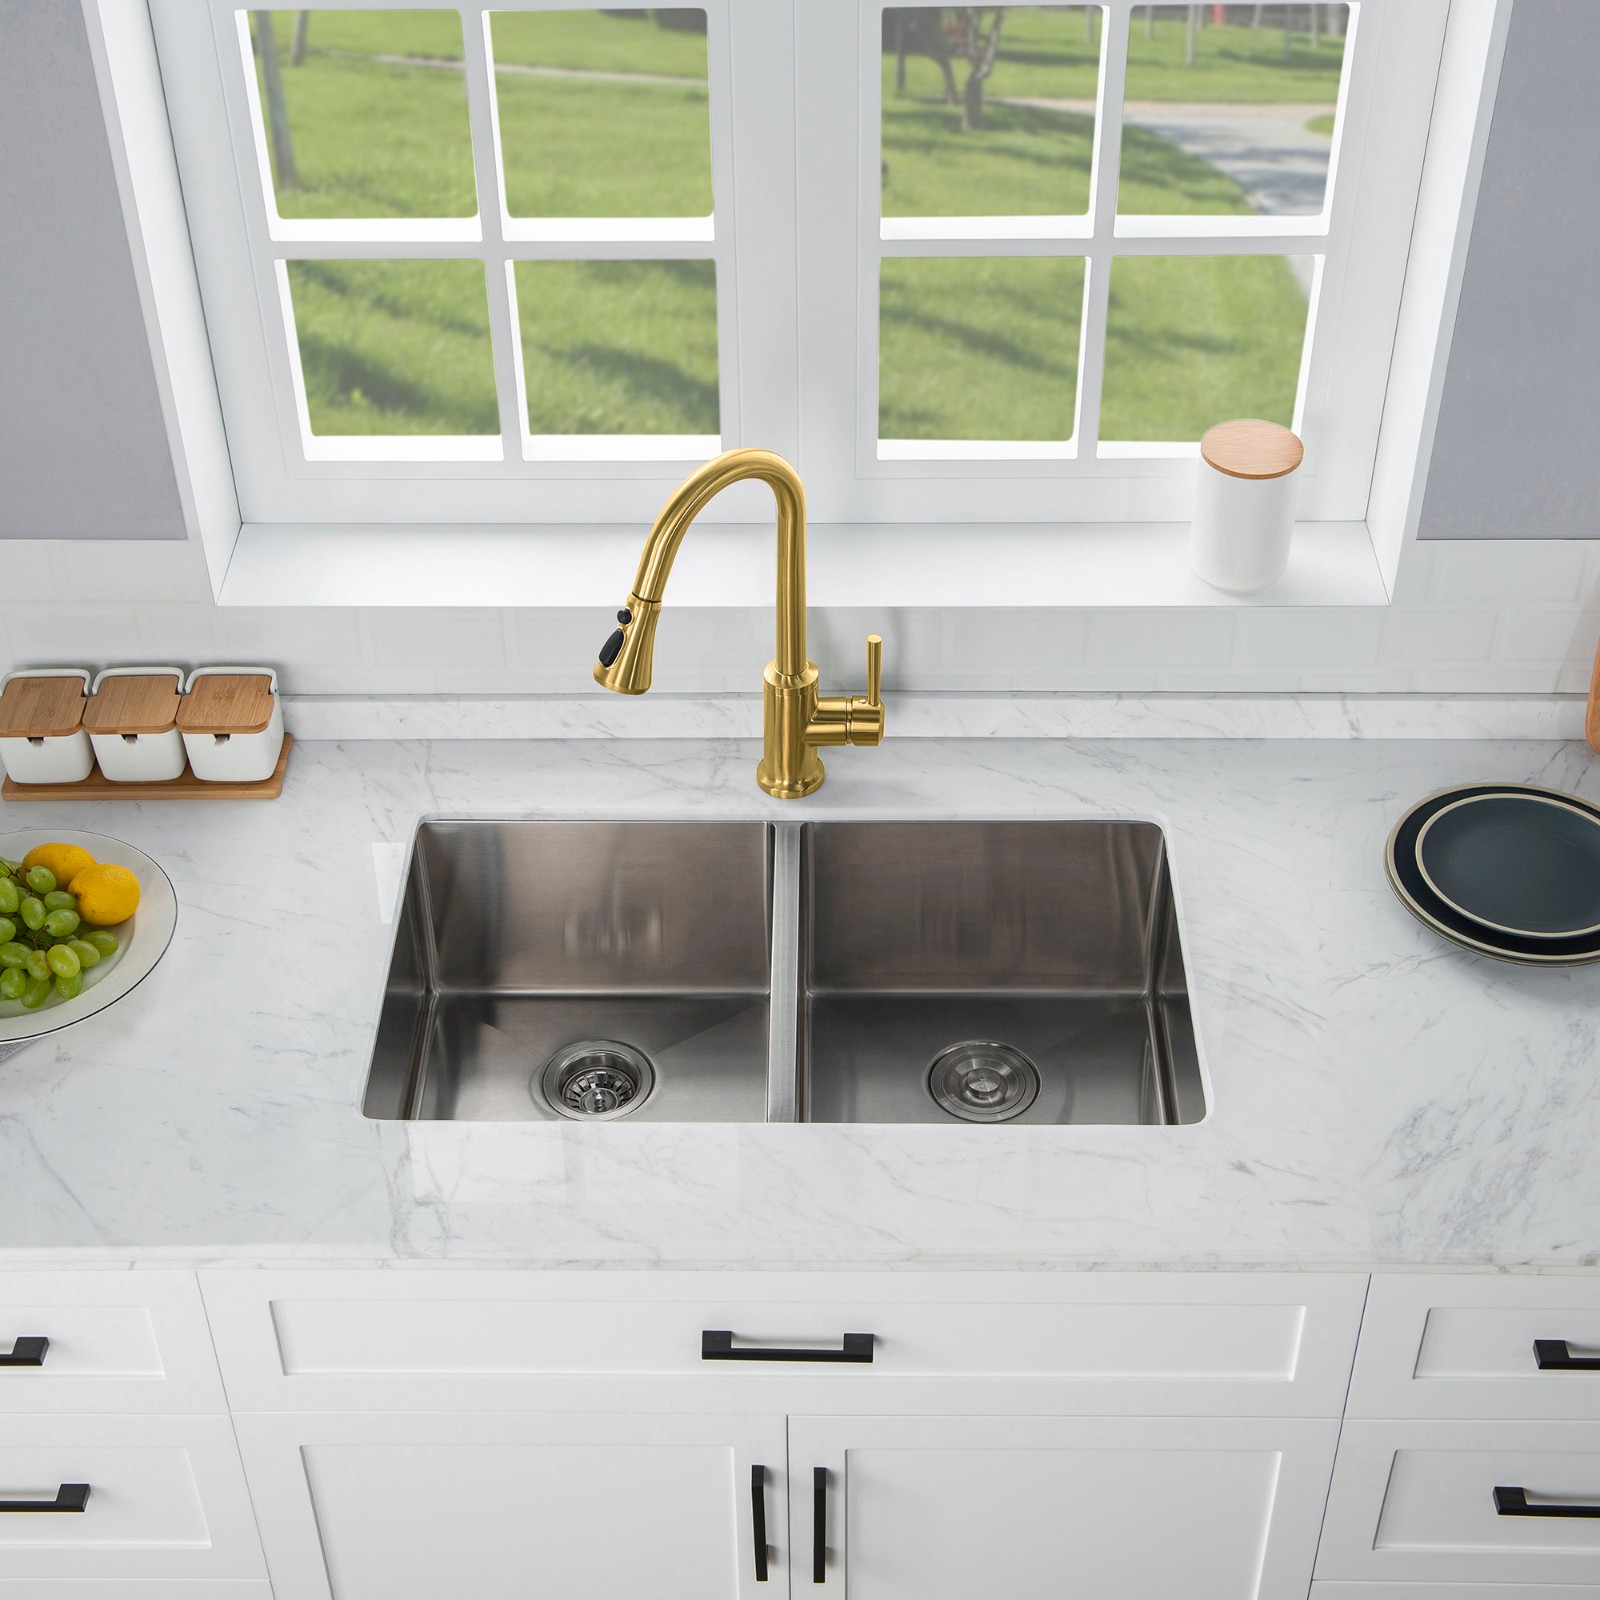  WOODBRIDGE WK101201BG Stainless Steel Single Handle Pull Down Kitchen Faucet in Brushed Gold Finish._4990